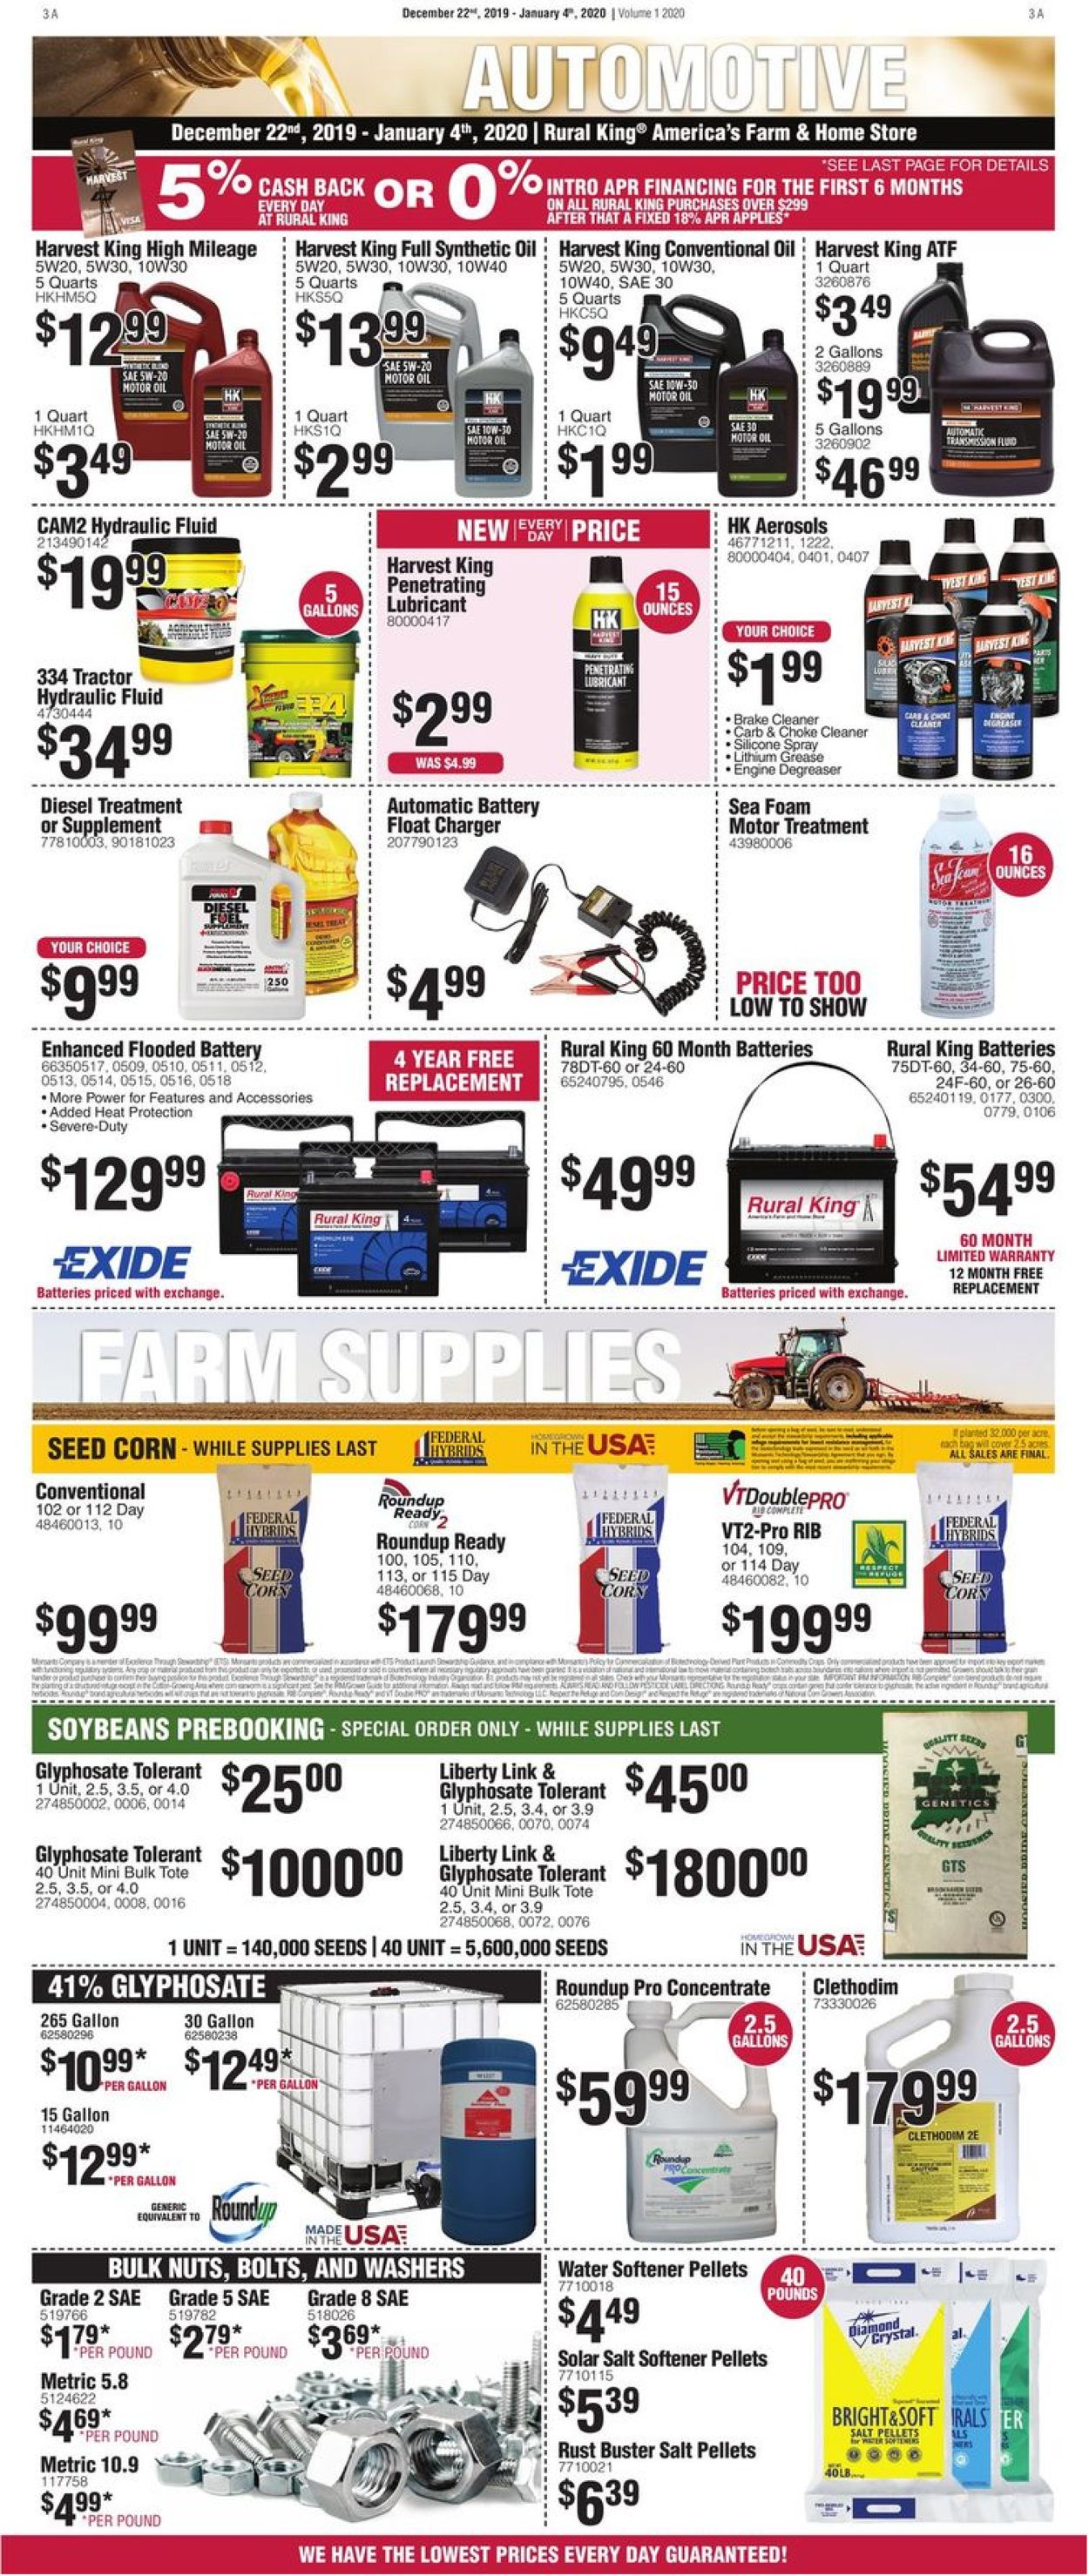 Catalogue Rural King - Christmas & New Year's Ad 2019/2020 from 12/22/2019